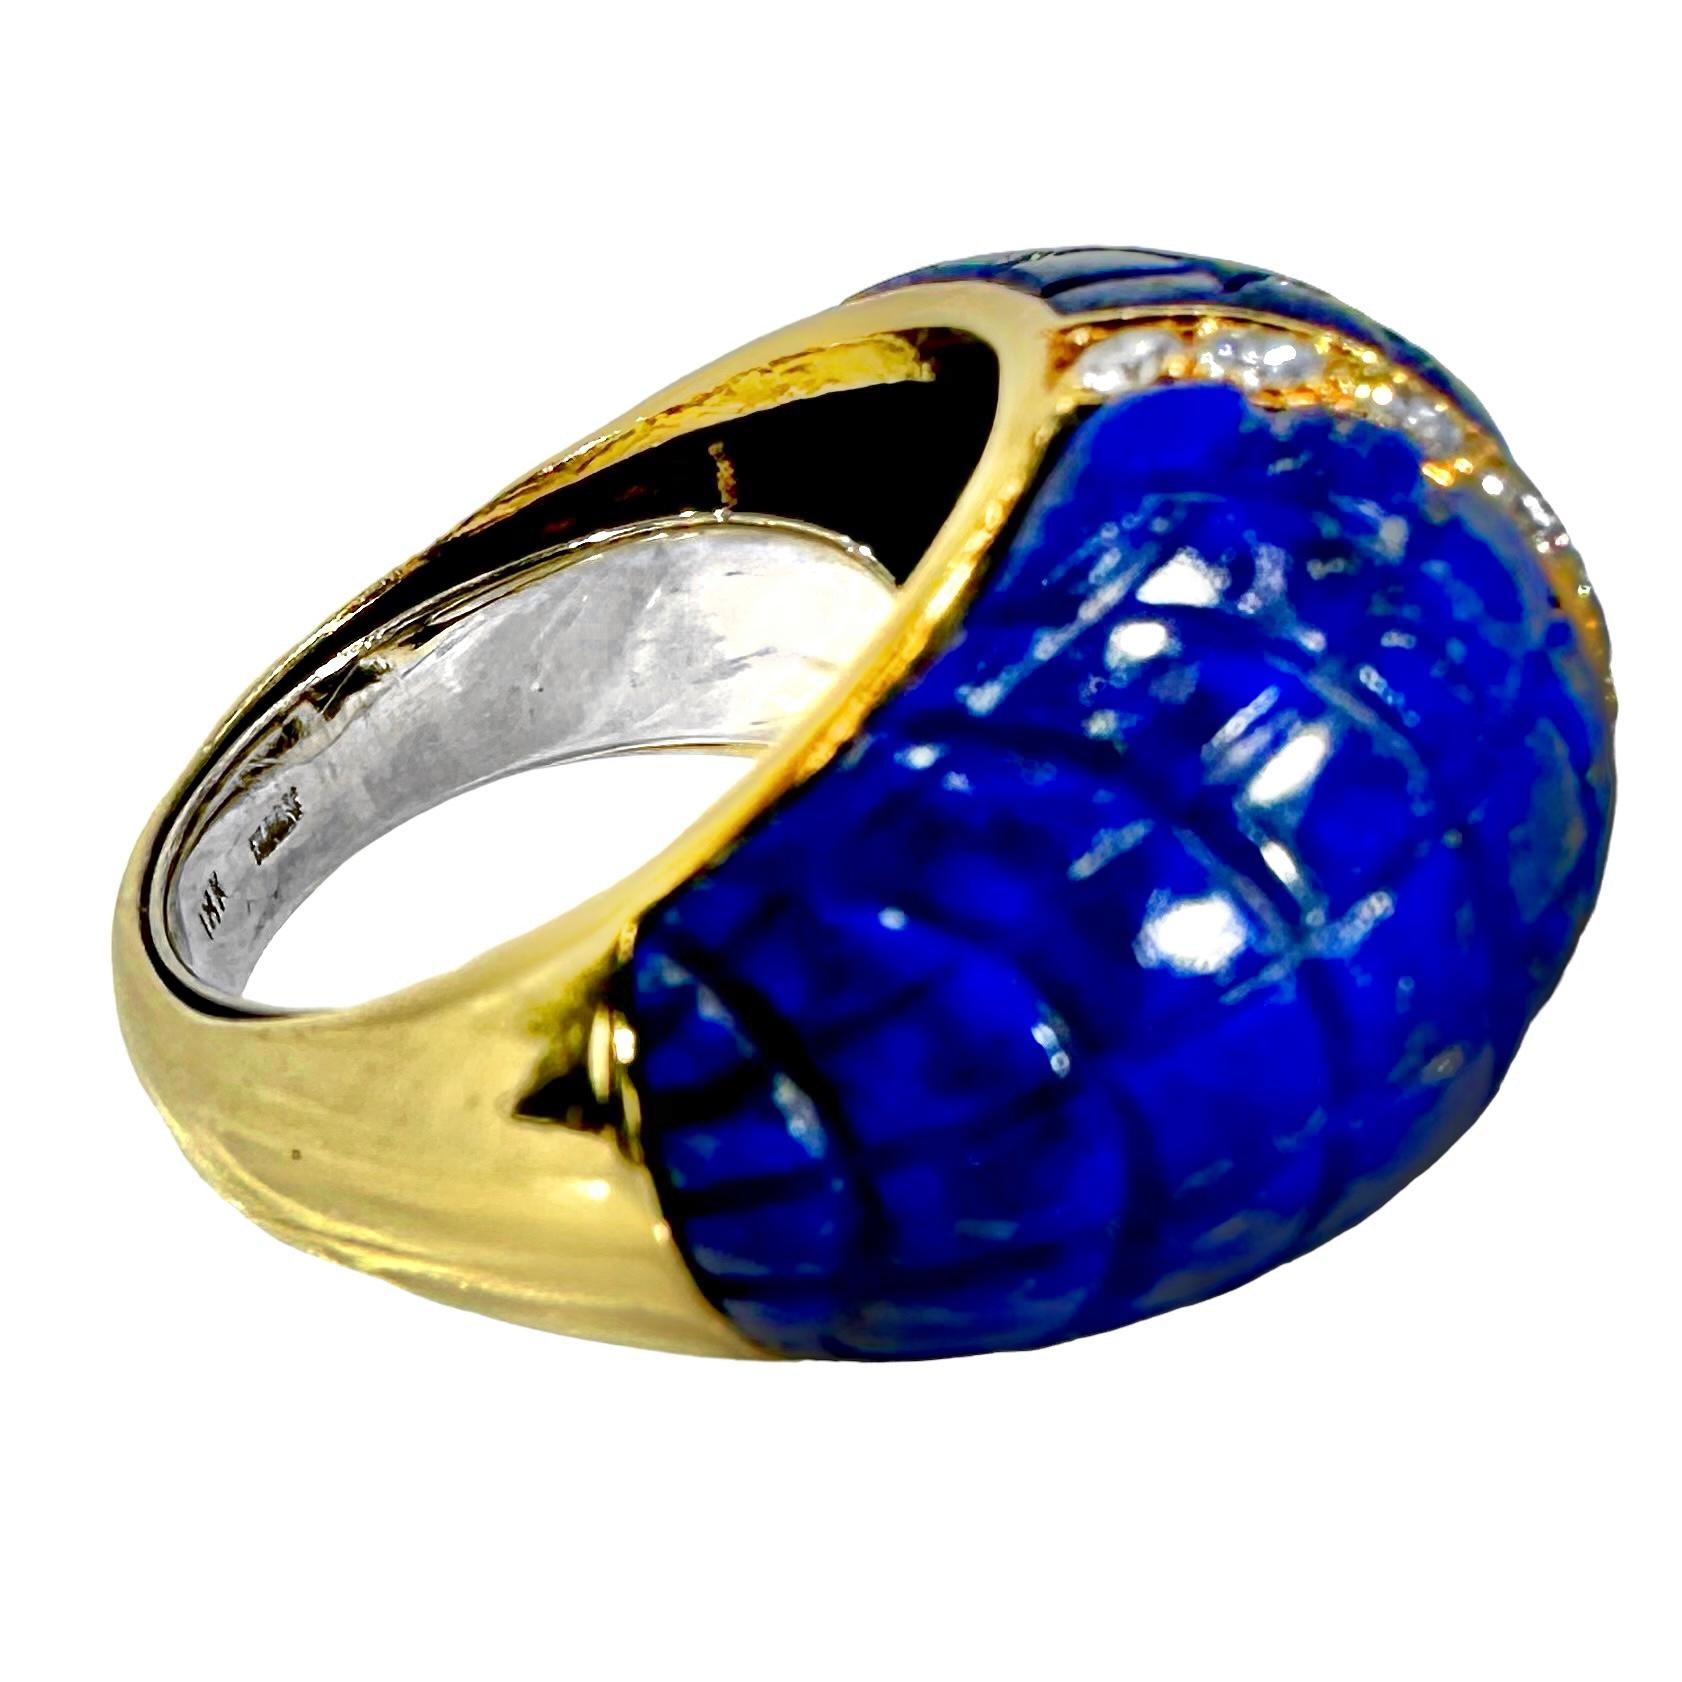 Modern Exquisitely Crafted Italian 18K Yellow Gold, Lapis Lazuli, and Diamond Ring For Sale